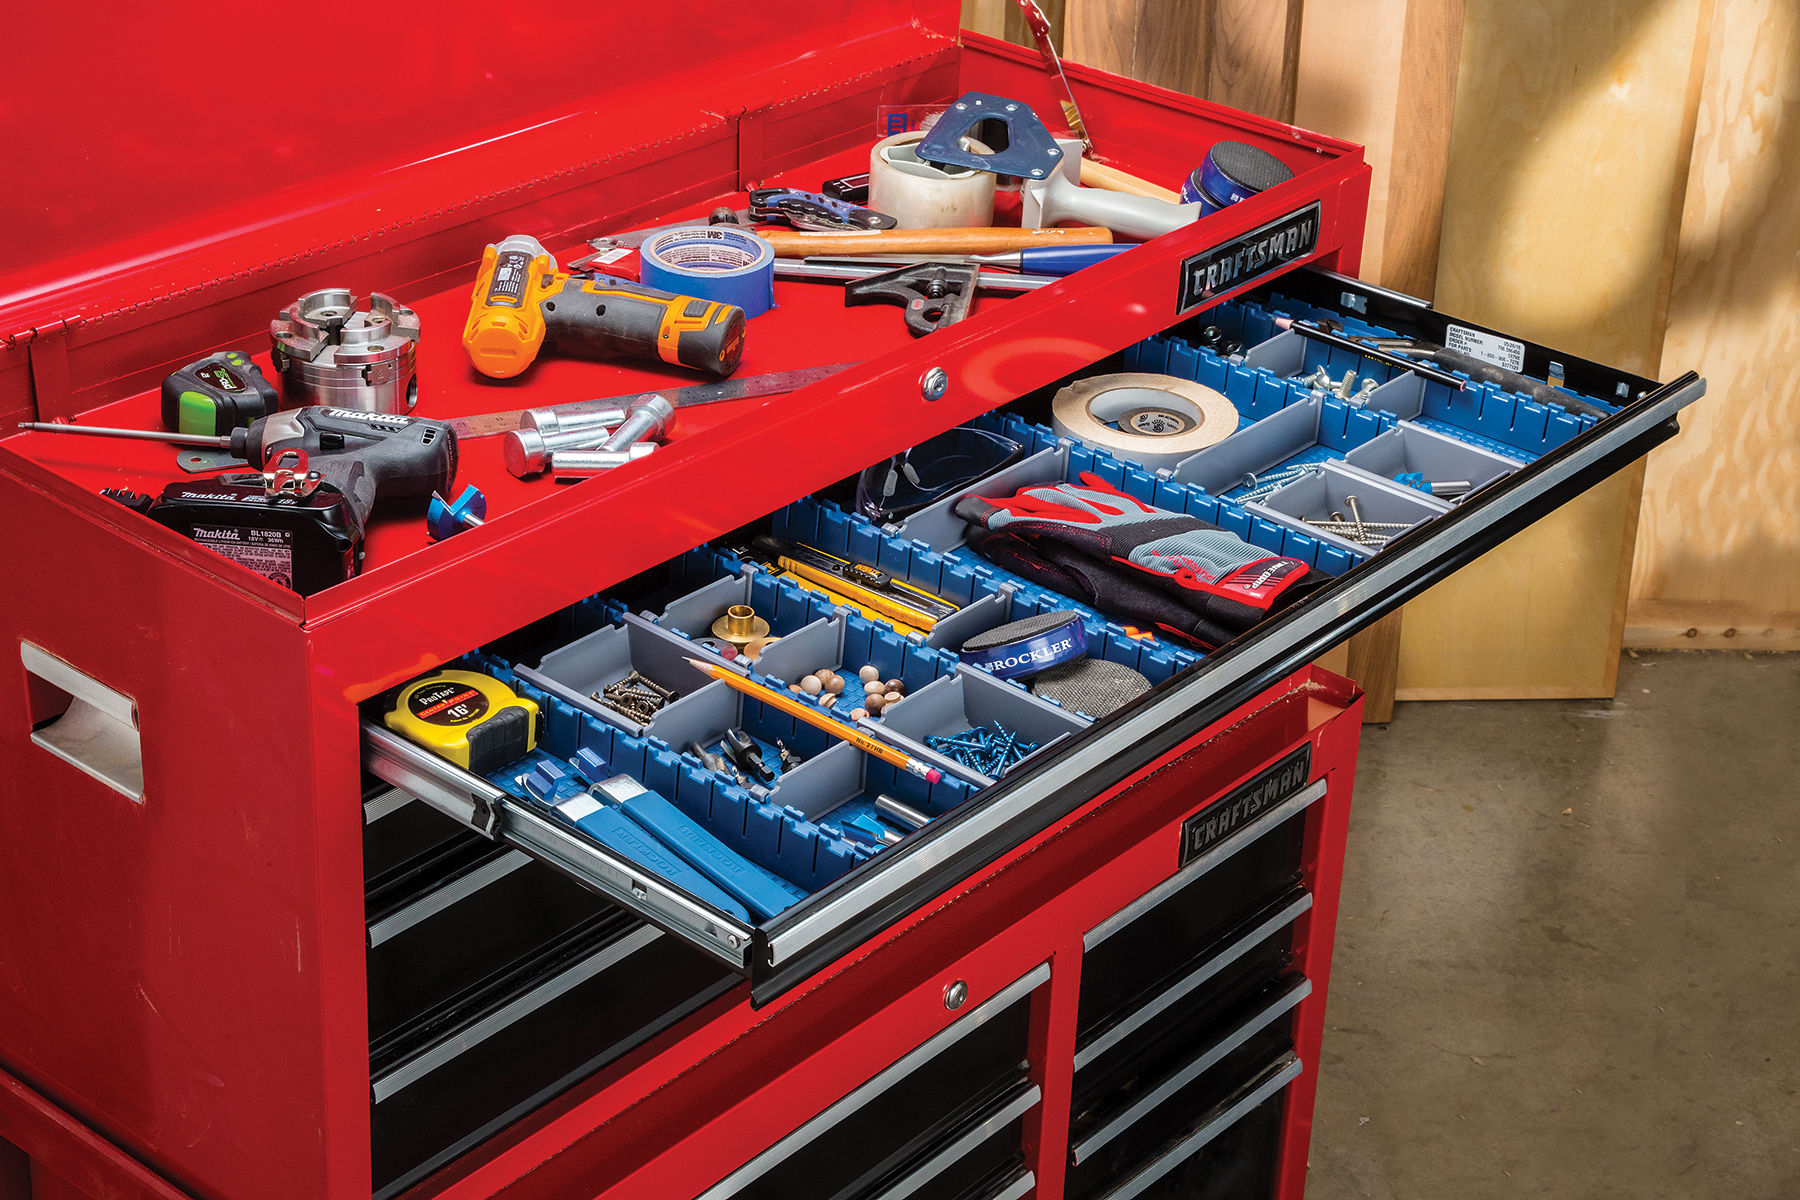 The Lock-Align Drawer Organizer System, which features cut-to-fit interlocking trays plus bins and dividers, won in the "Storage Organizers & Accessories" category.